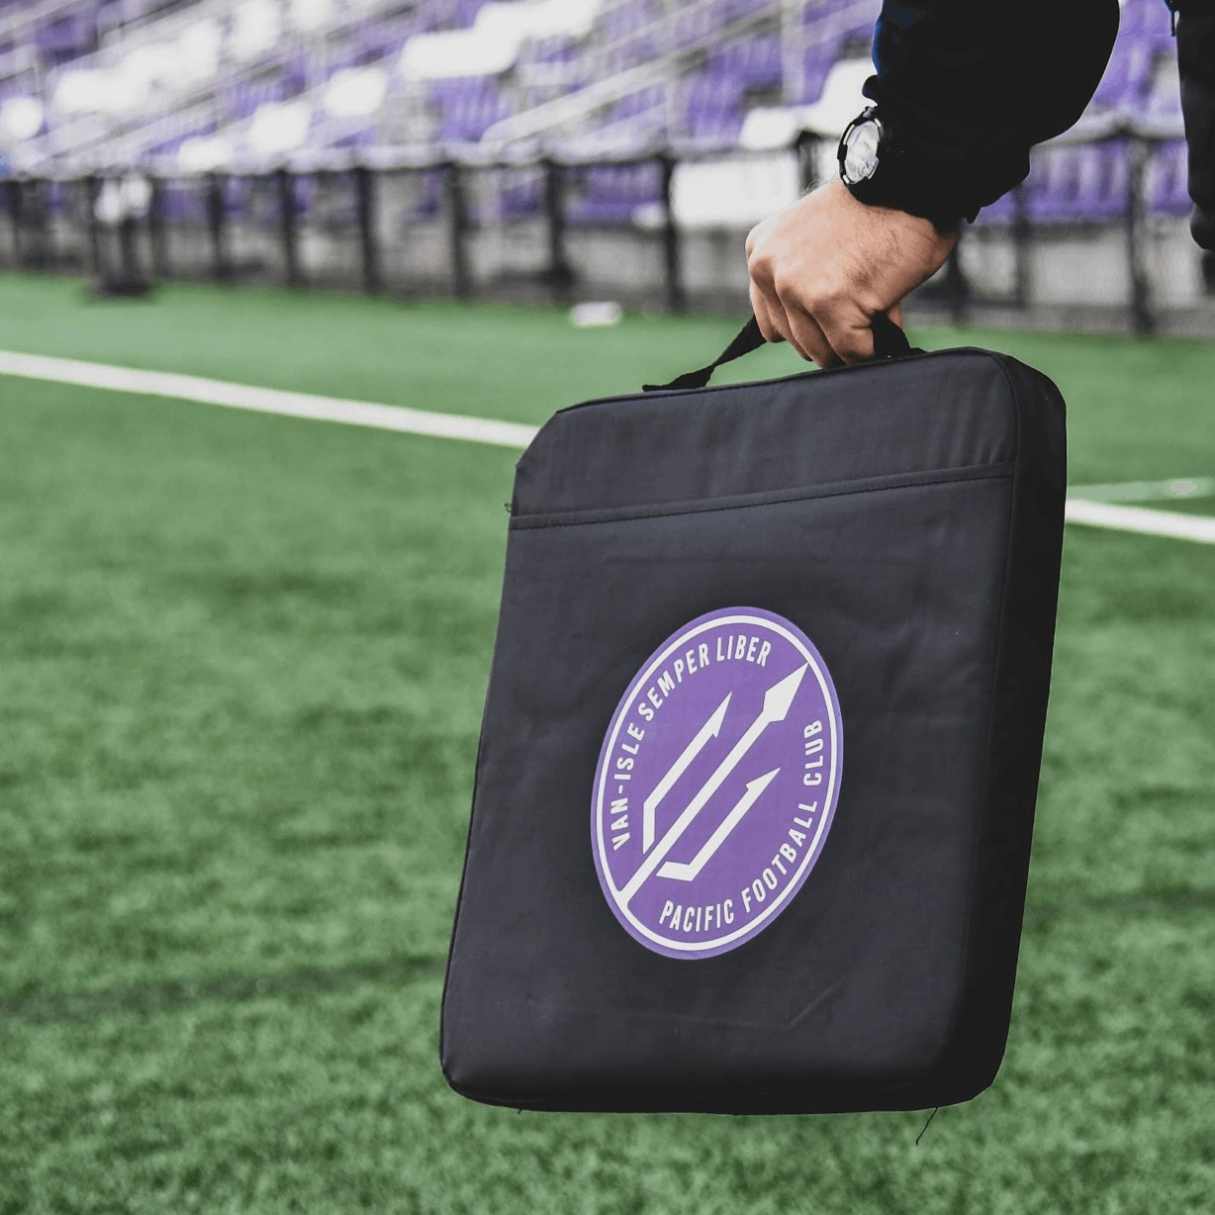 Stadium Seat Cushion Review: Comfortable and Durable